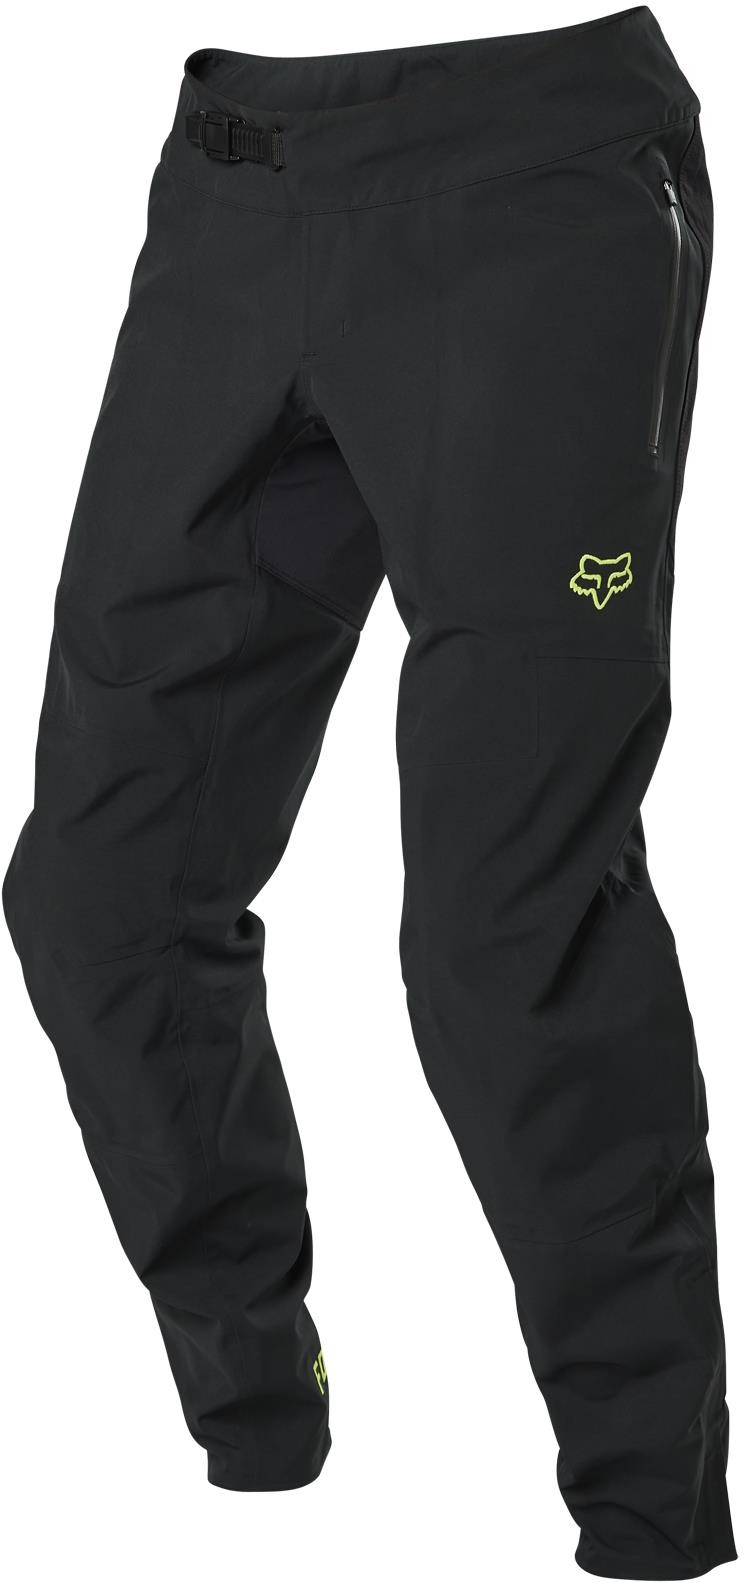 Defend 3L Waterproof MTB Cycling Trousers image 1